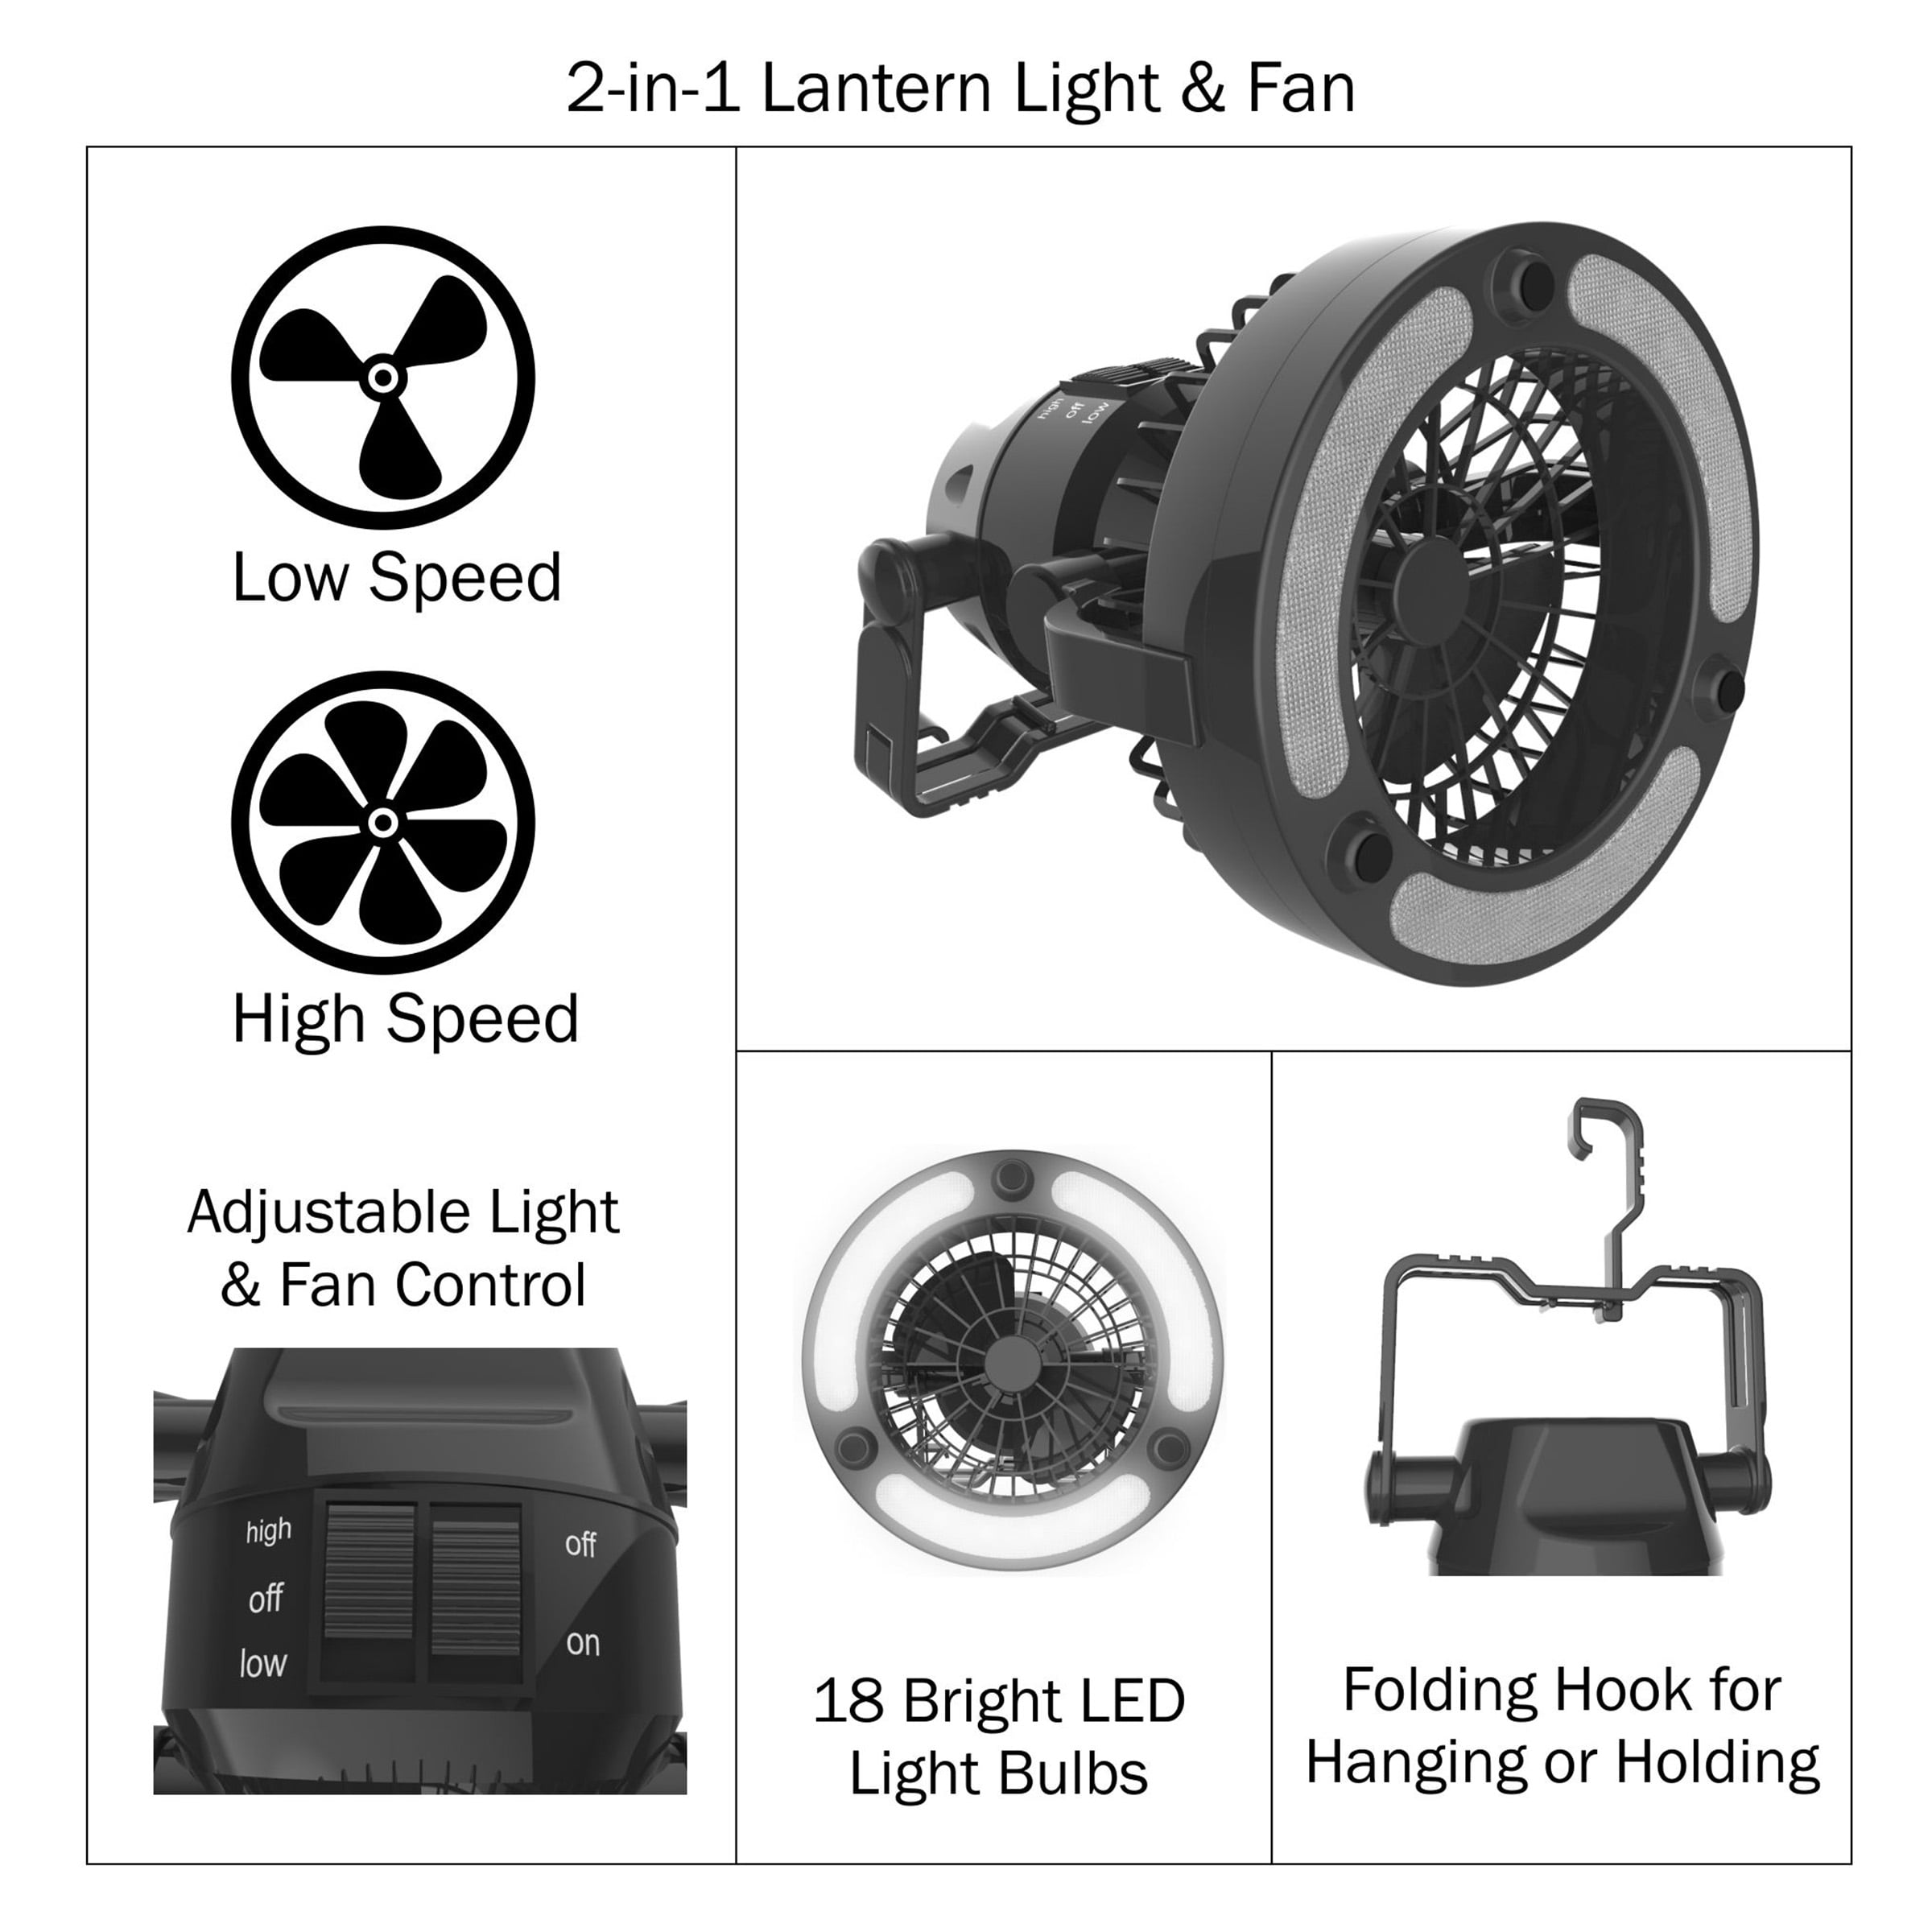 Portable 2 in 1 LED Camping Lantern with Ceiling Fan by Wakeman